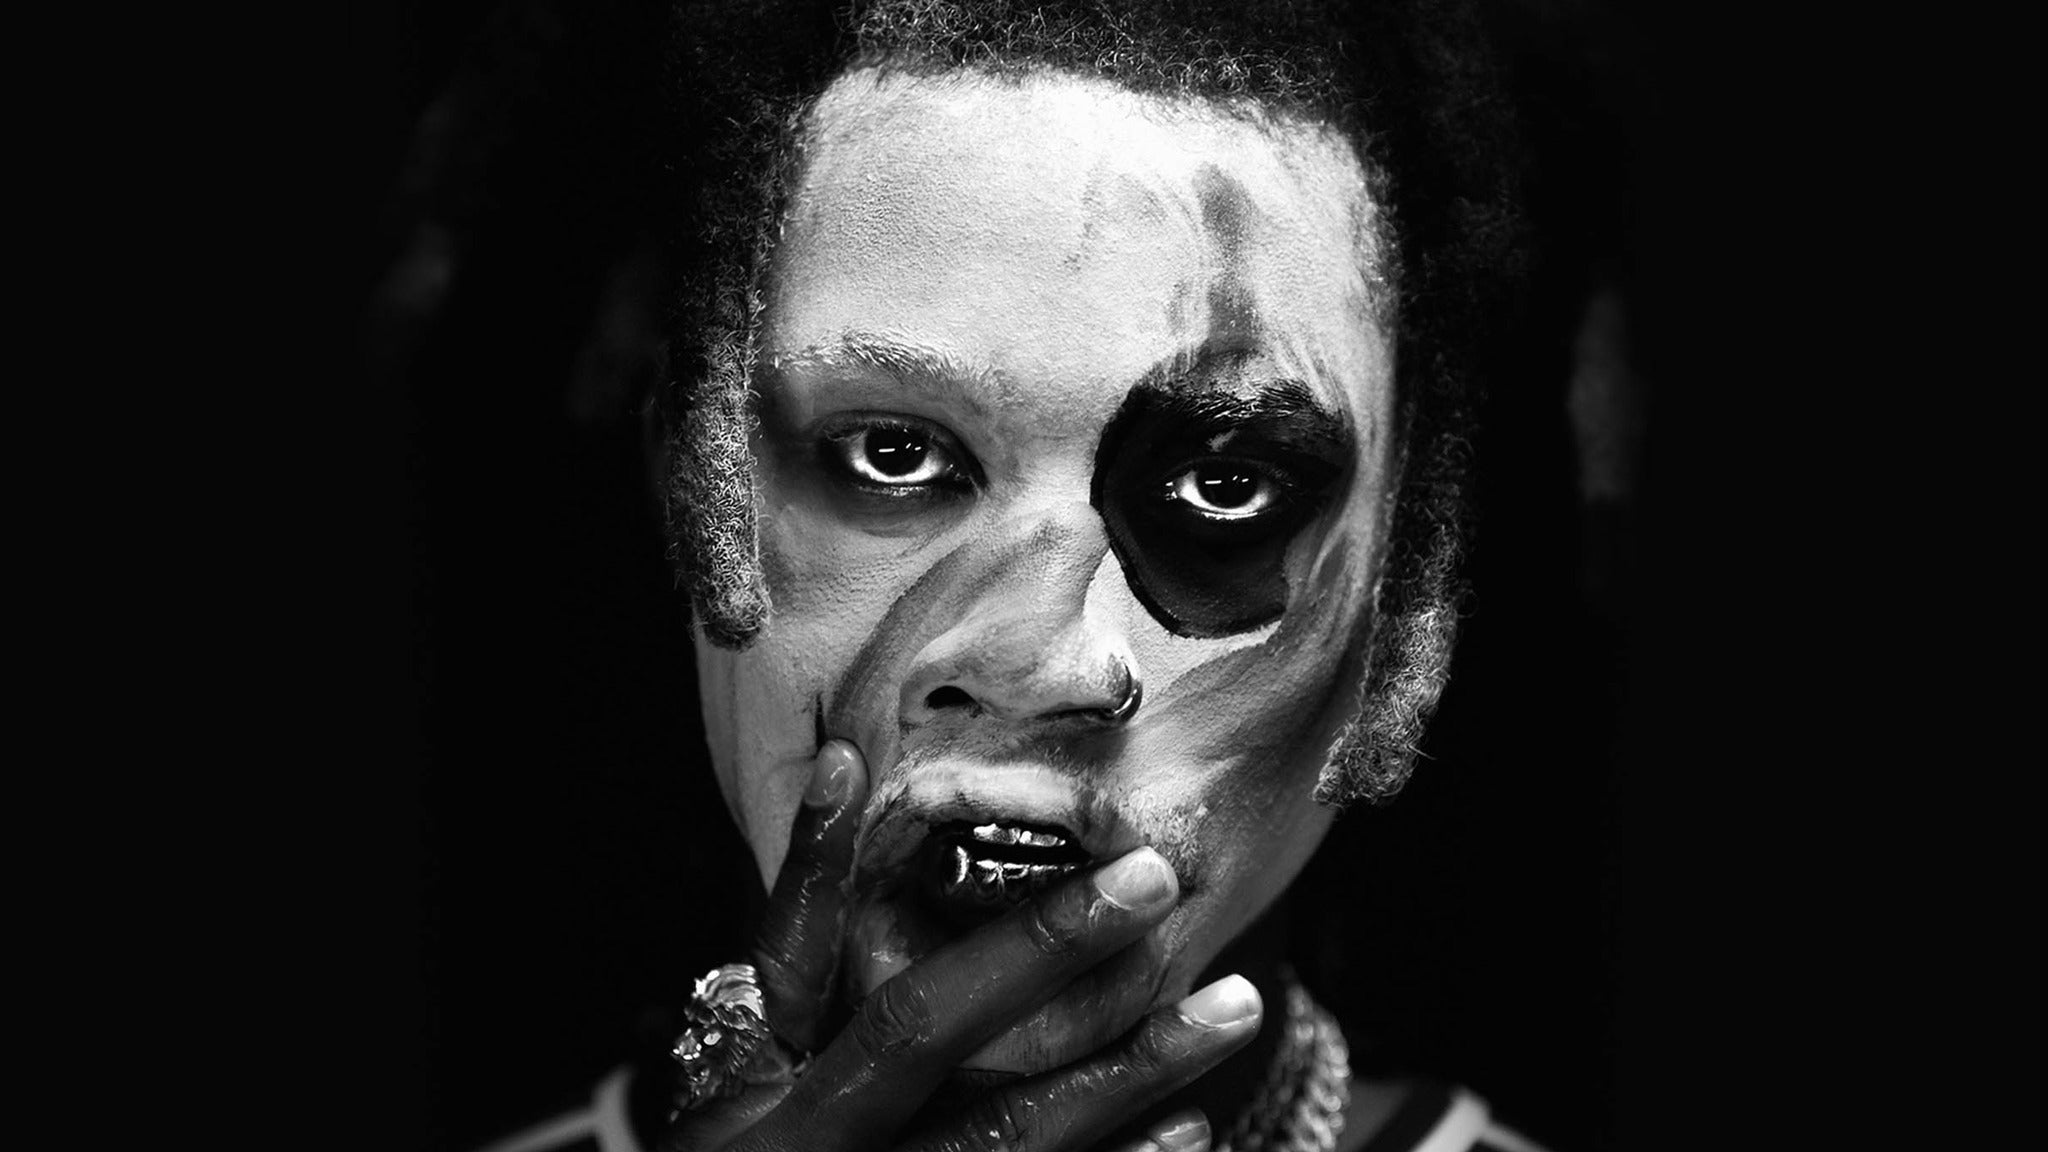 Denzel Curry in St. Paul promo photo for Artist presale offer code